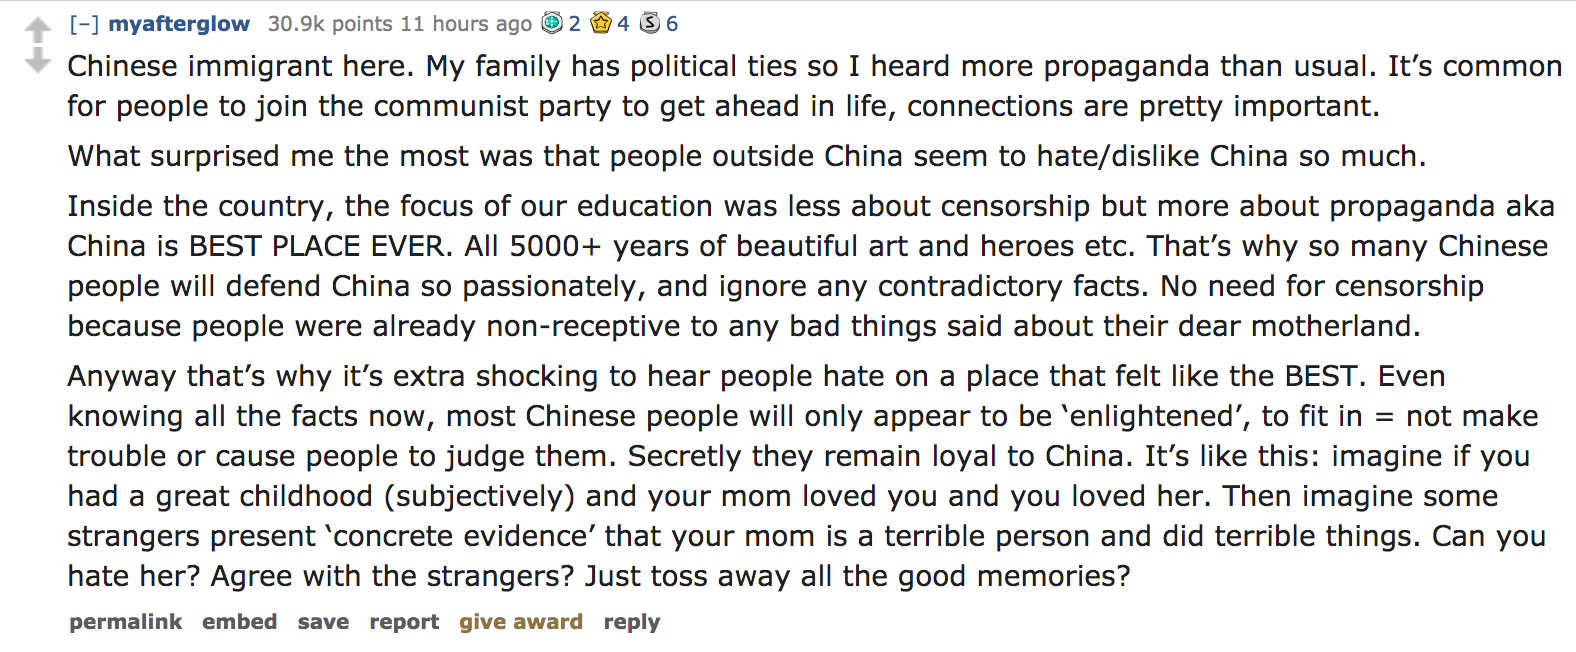 Chinese immigrant here. My family has political ties so I heard more propaganda than usual. It's common for people to join the communist party to get ahead in life, connections are pretty important. What sur